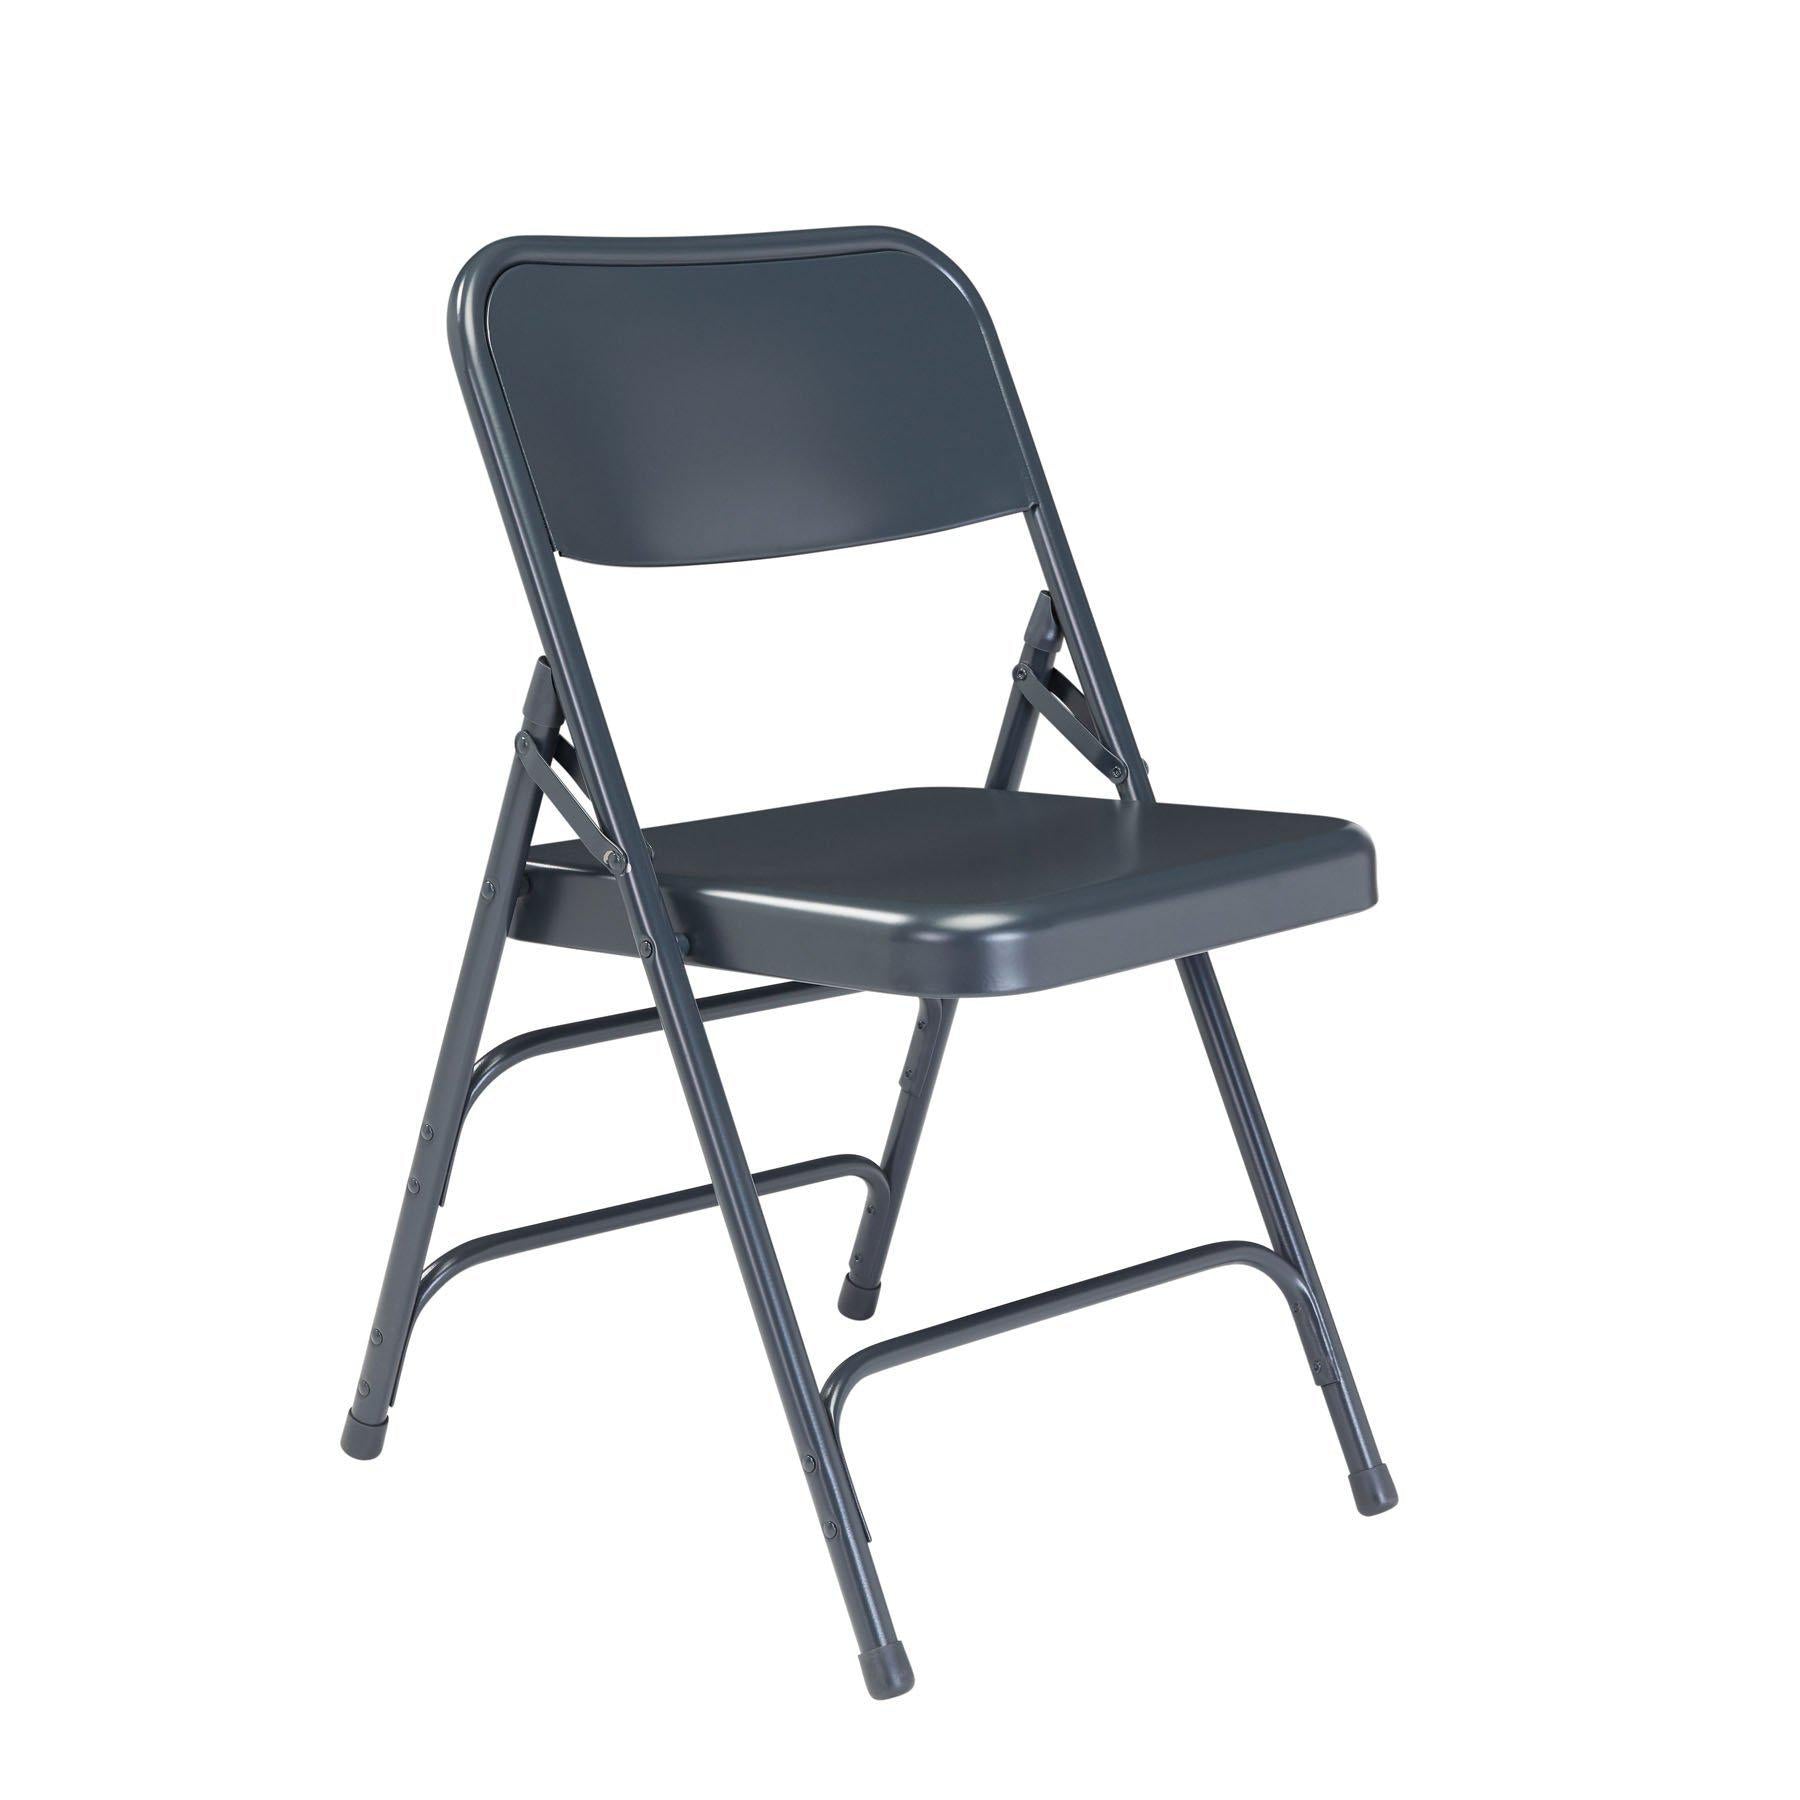 Deluxe All-Steel Triple Brace Double Hinge Folding Chair (Carton of 4)-Chairs-Char Blue-